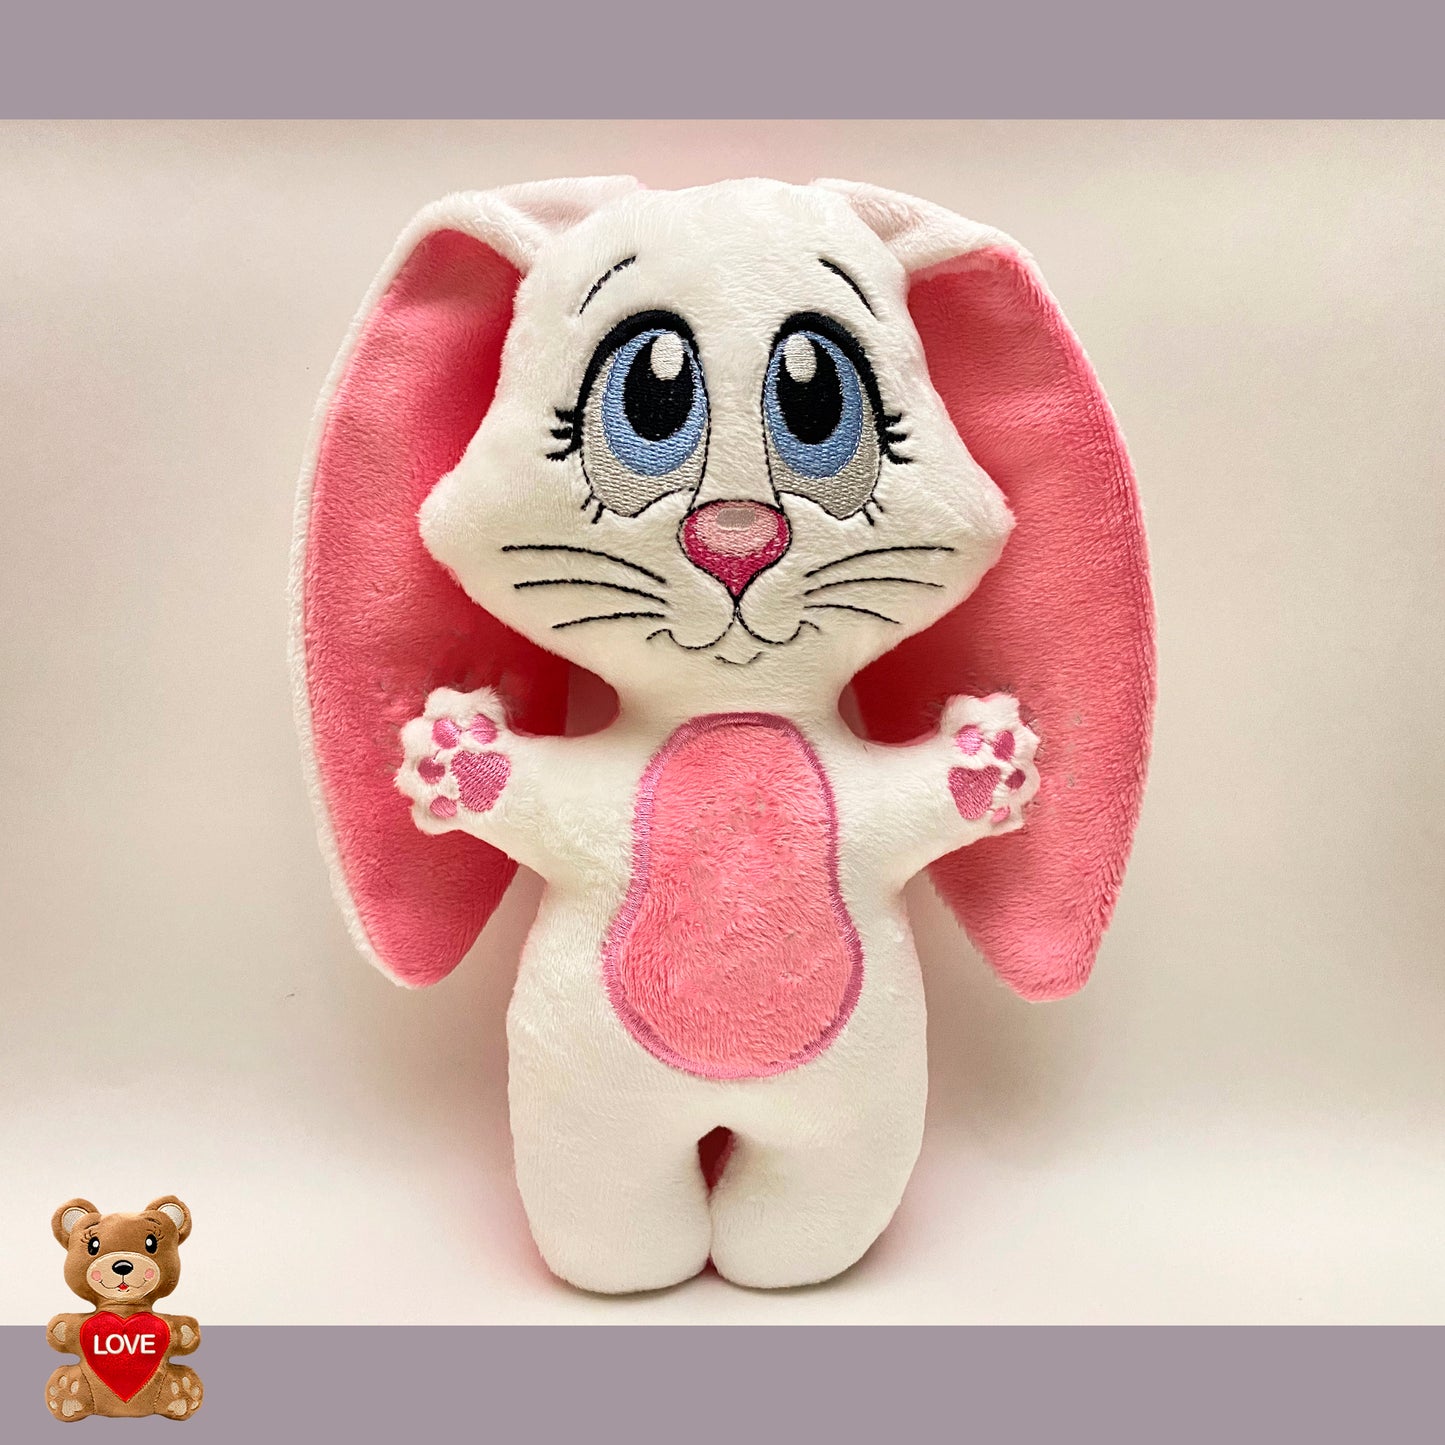 Personalised embroidery Plush Soft Toy Bunny Rabbit ,Super cute personalised soft plush toy, Personalised Gift, Unique Personalized Birthday Gifts , Custom Gifts For Children